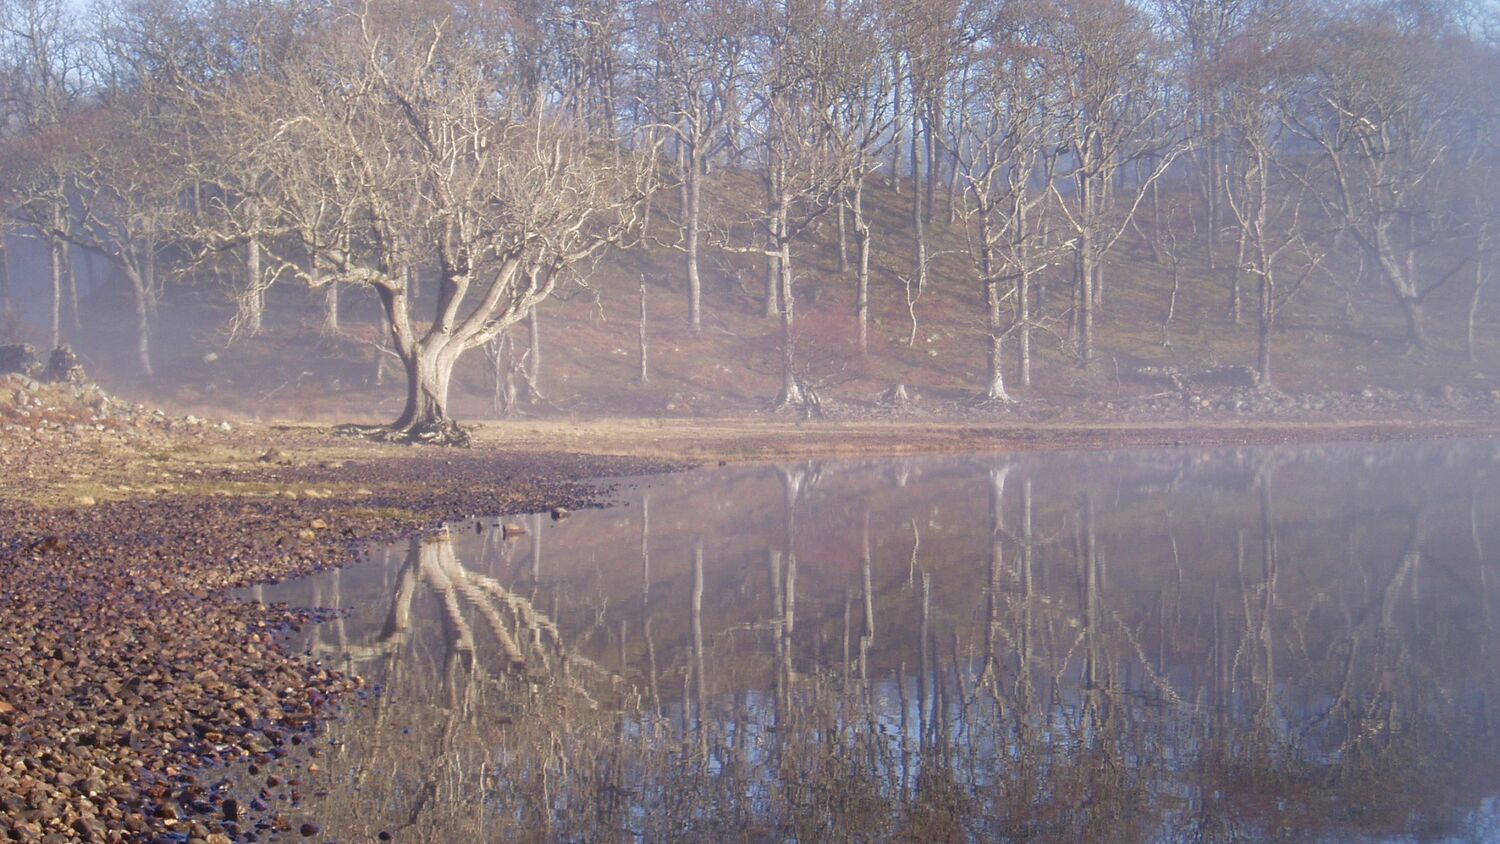 Bare-branched oak trees grown on a small hillside, with a loch at the bottom. The branches are clearly reflected in the still water against the blue sky.